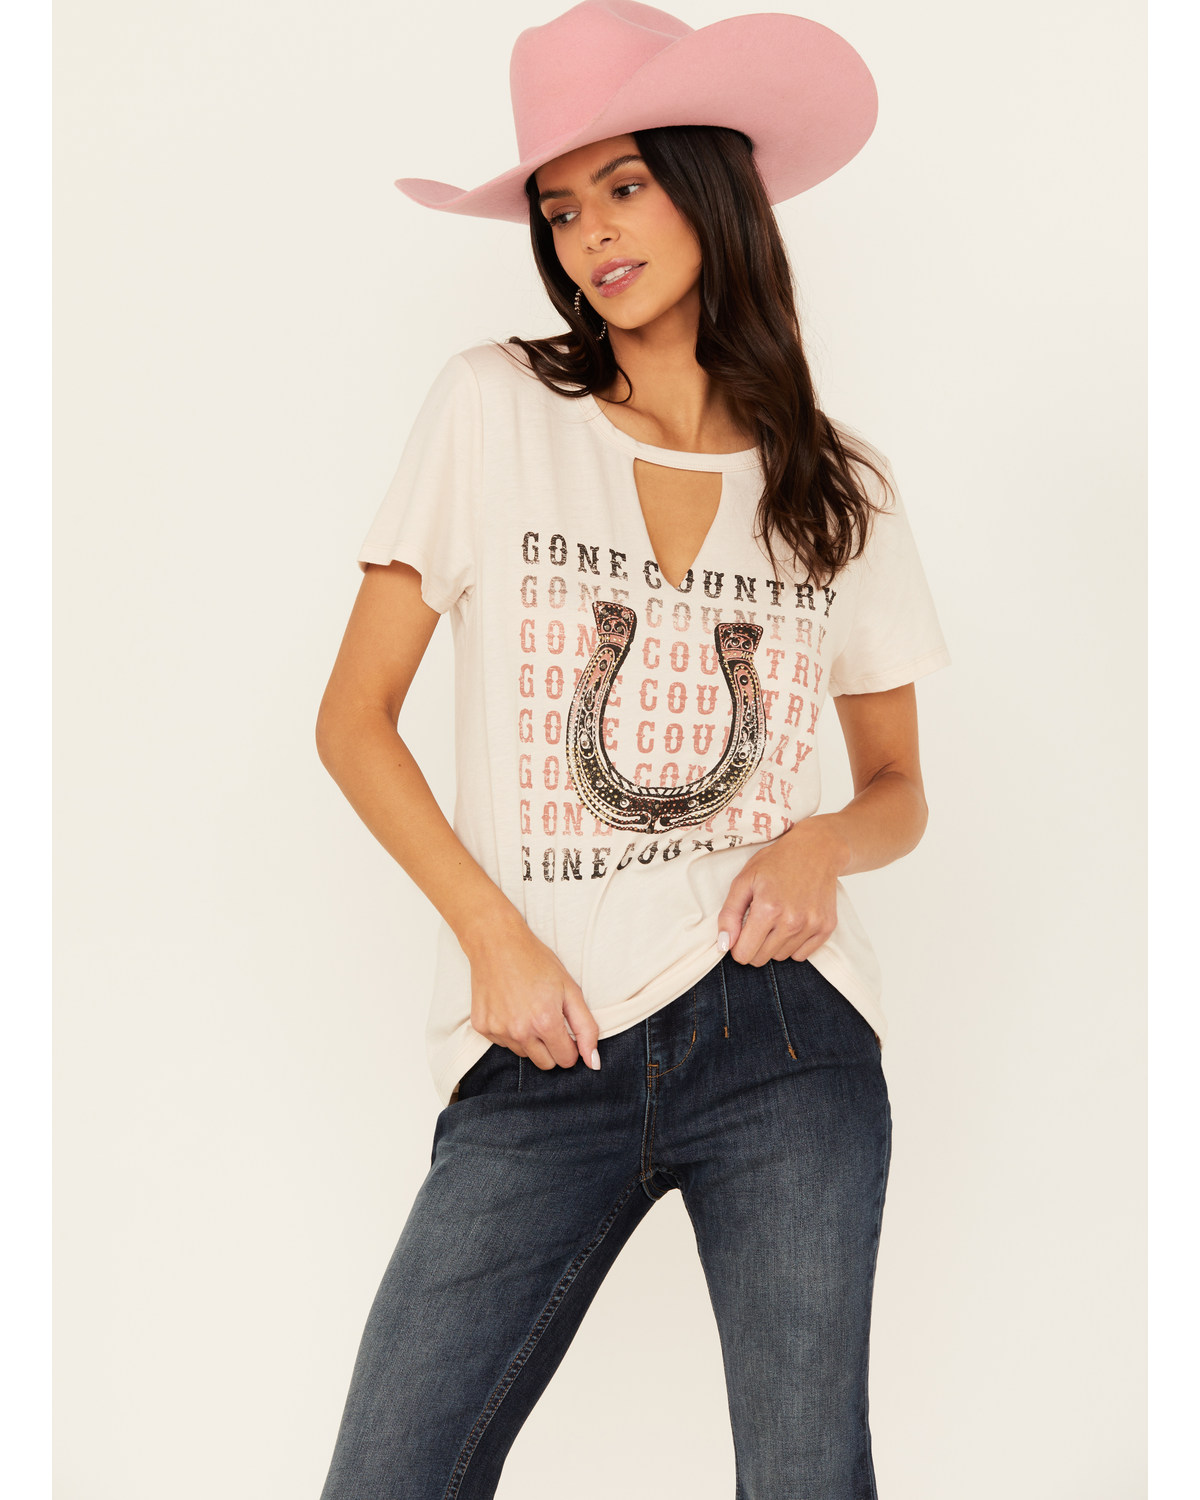 Blended Women's Gone Country Rhinestone Short Sleeve Graphic Tee